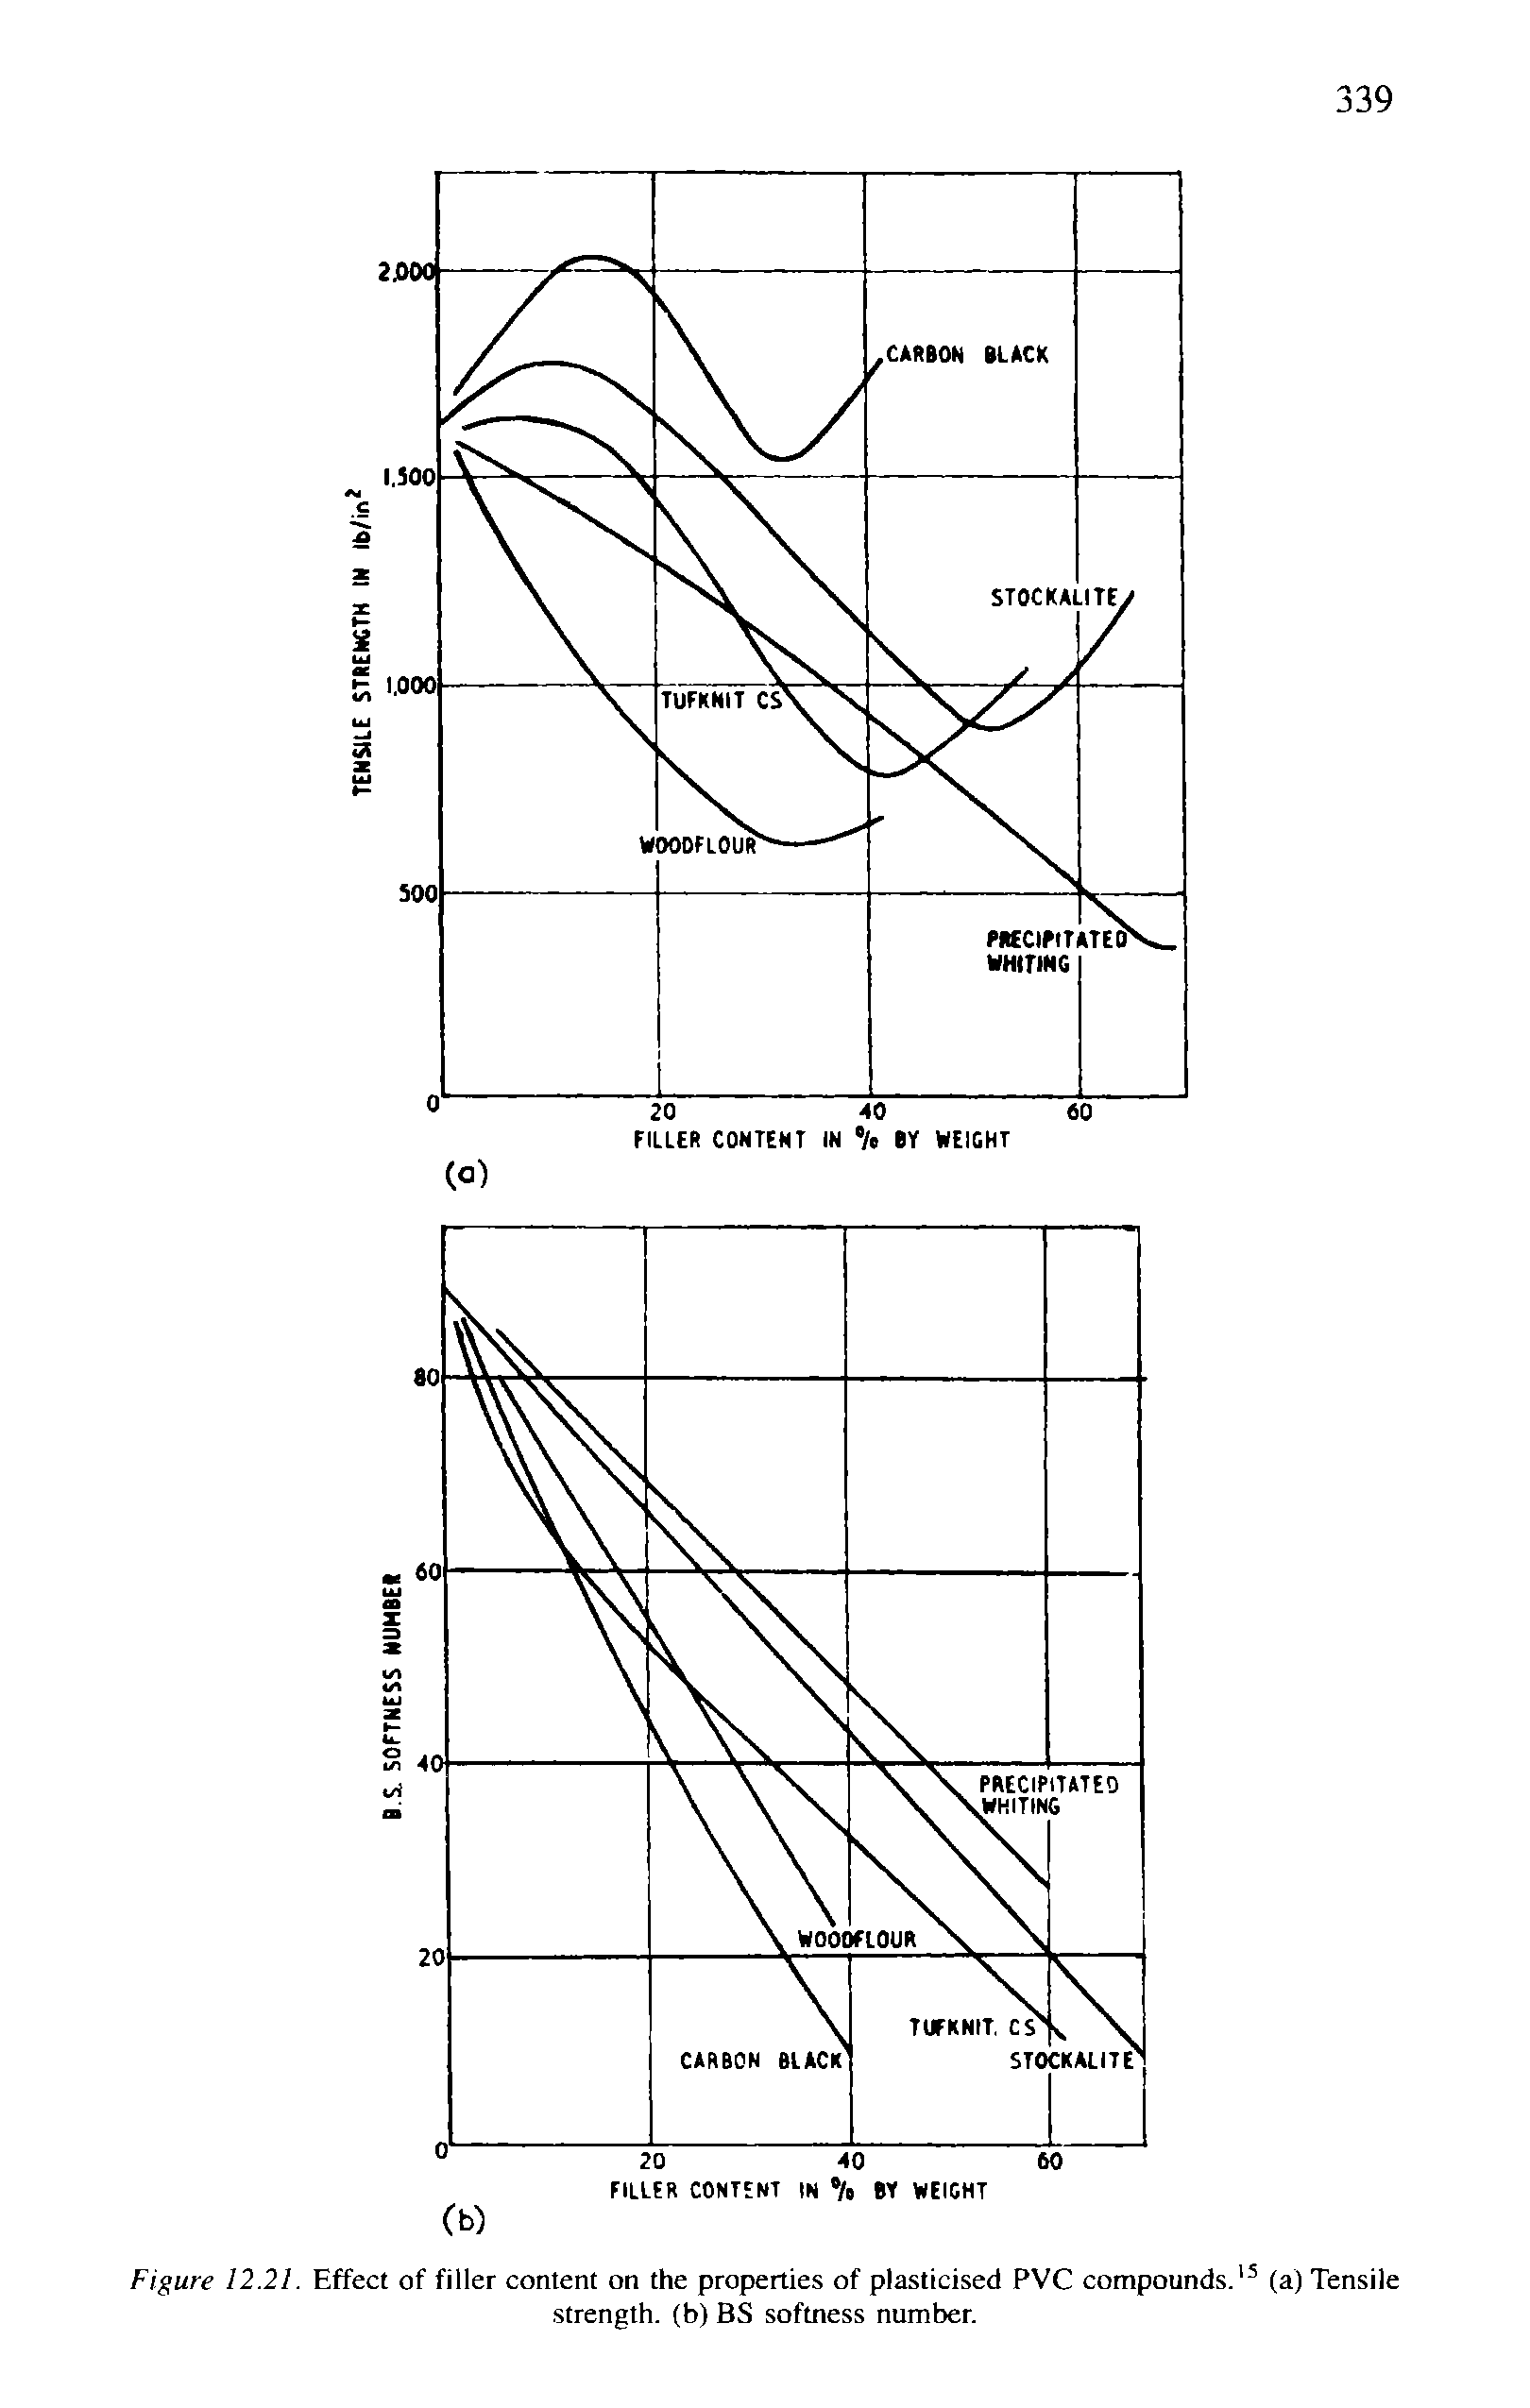 Figure 12.21. Effect of filler content on the properties of plasticised PVC compounds. (a) Tensile strength, (b) BS softness number.